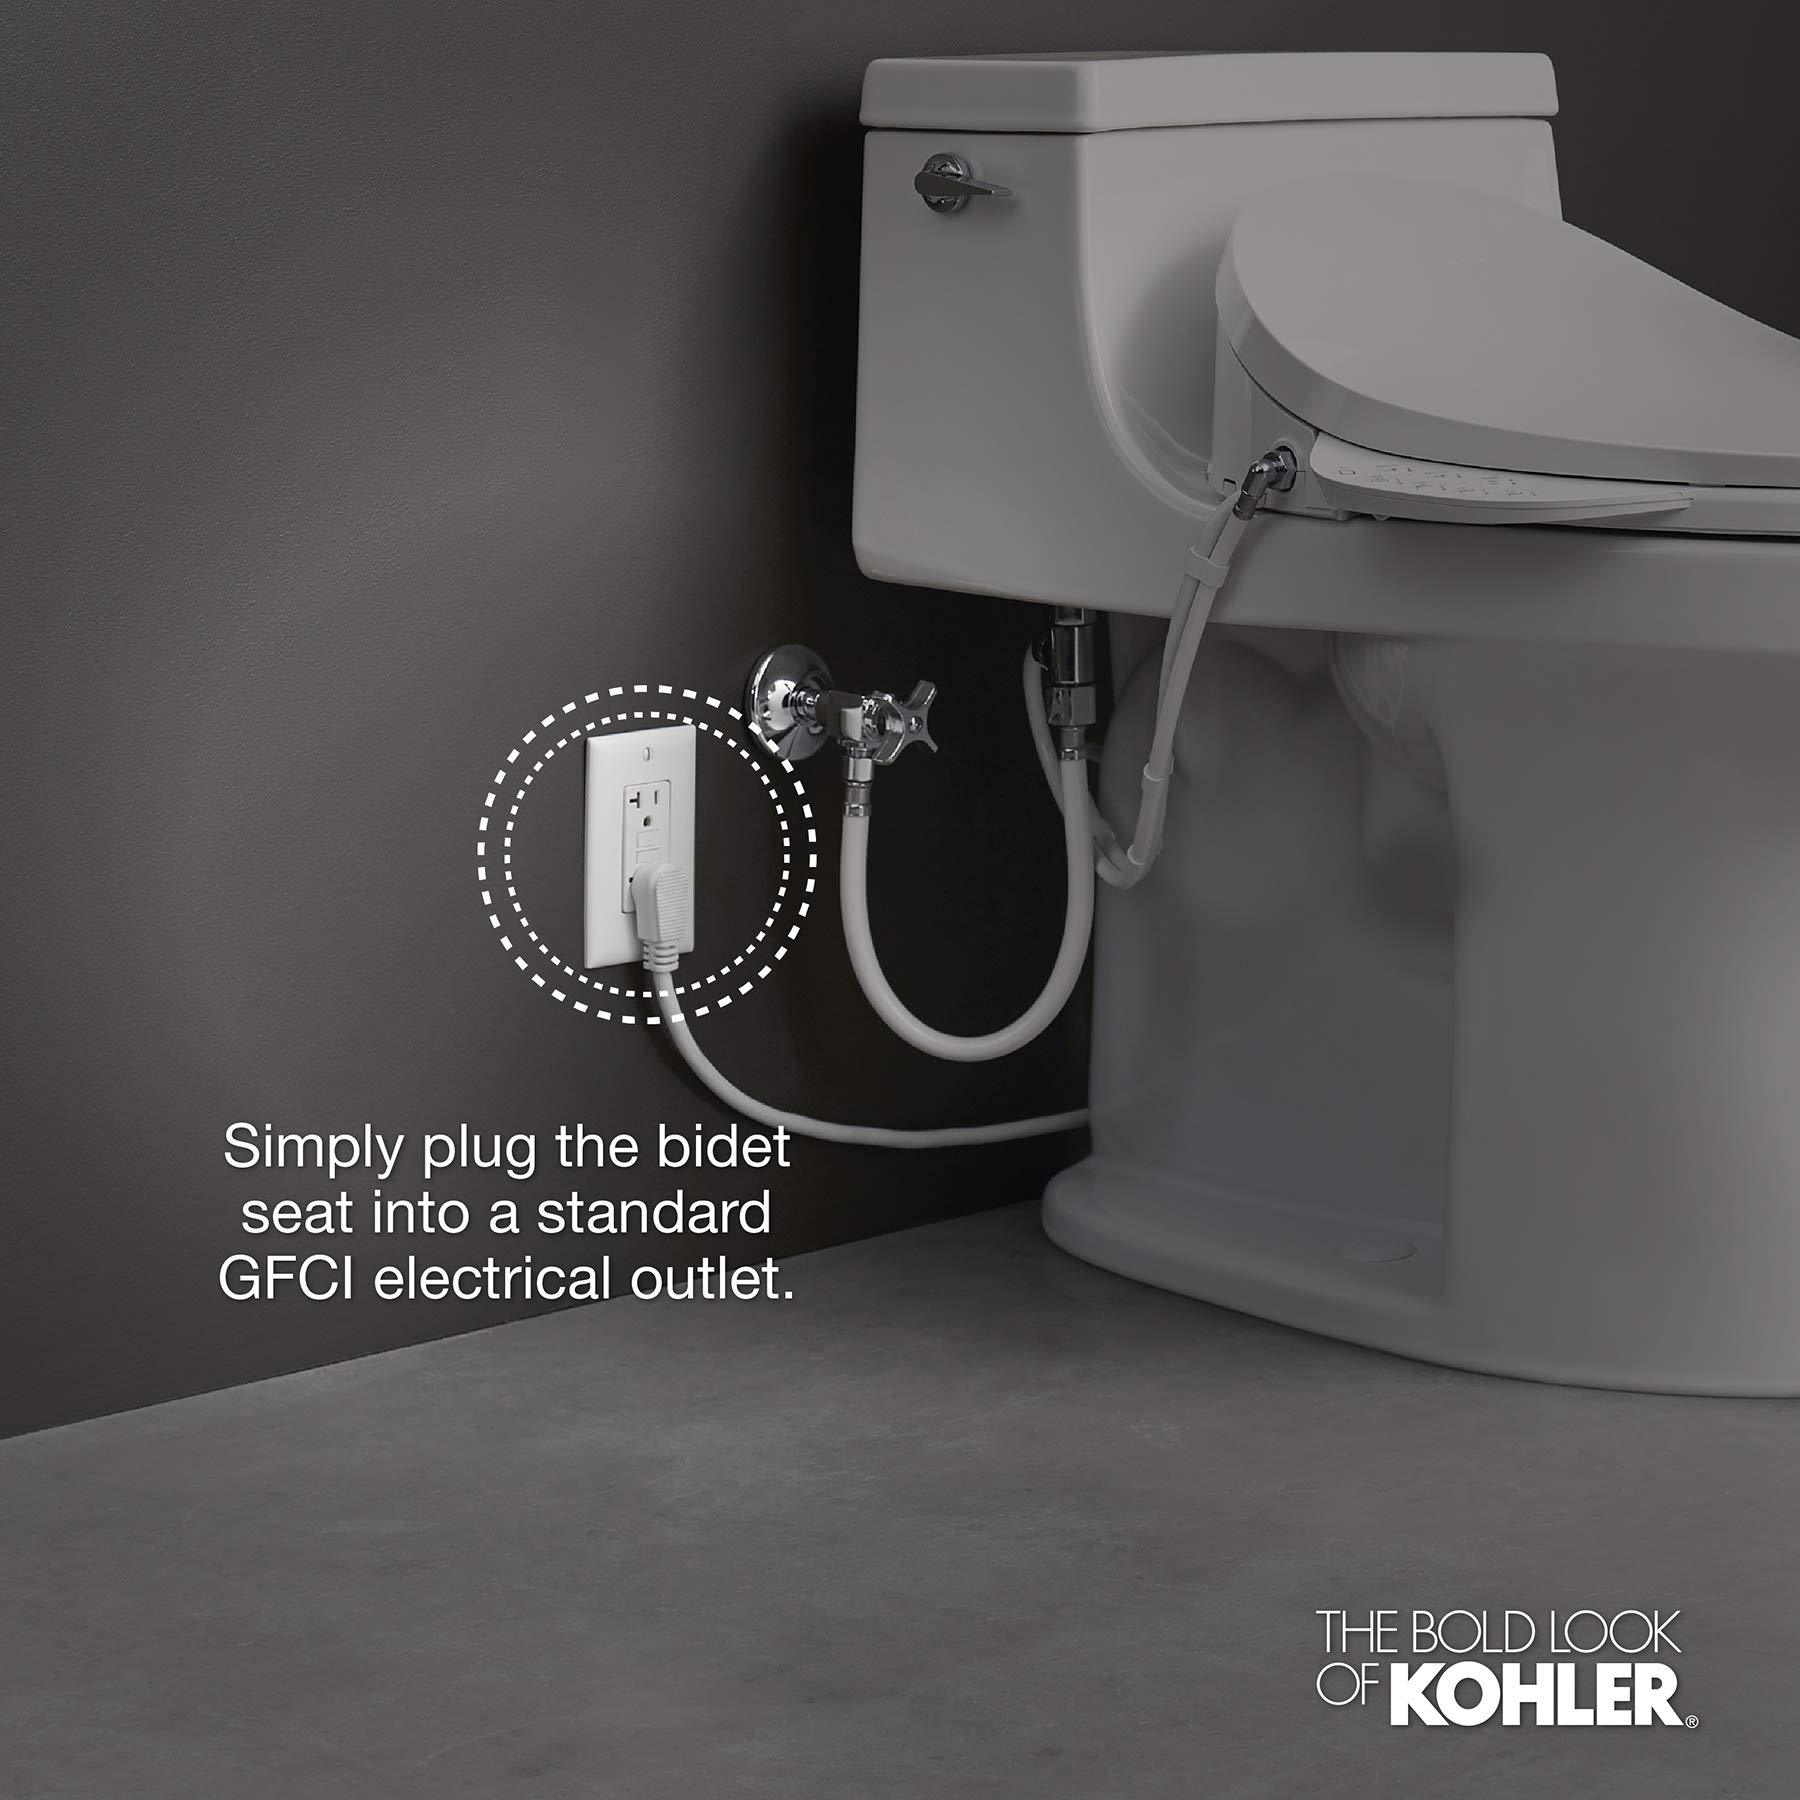 KOHLER K-8298-CR-0 C3 455 Elongated Heated Bidet Toilet Seat, White with Remote Control, Quiet-Close Lid, Automatic Deodorization, Self-Cleaning Wand, Adjustable Water Pressure and Nightlight